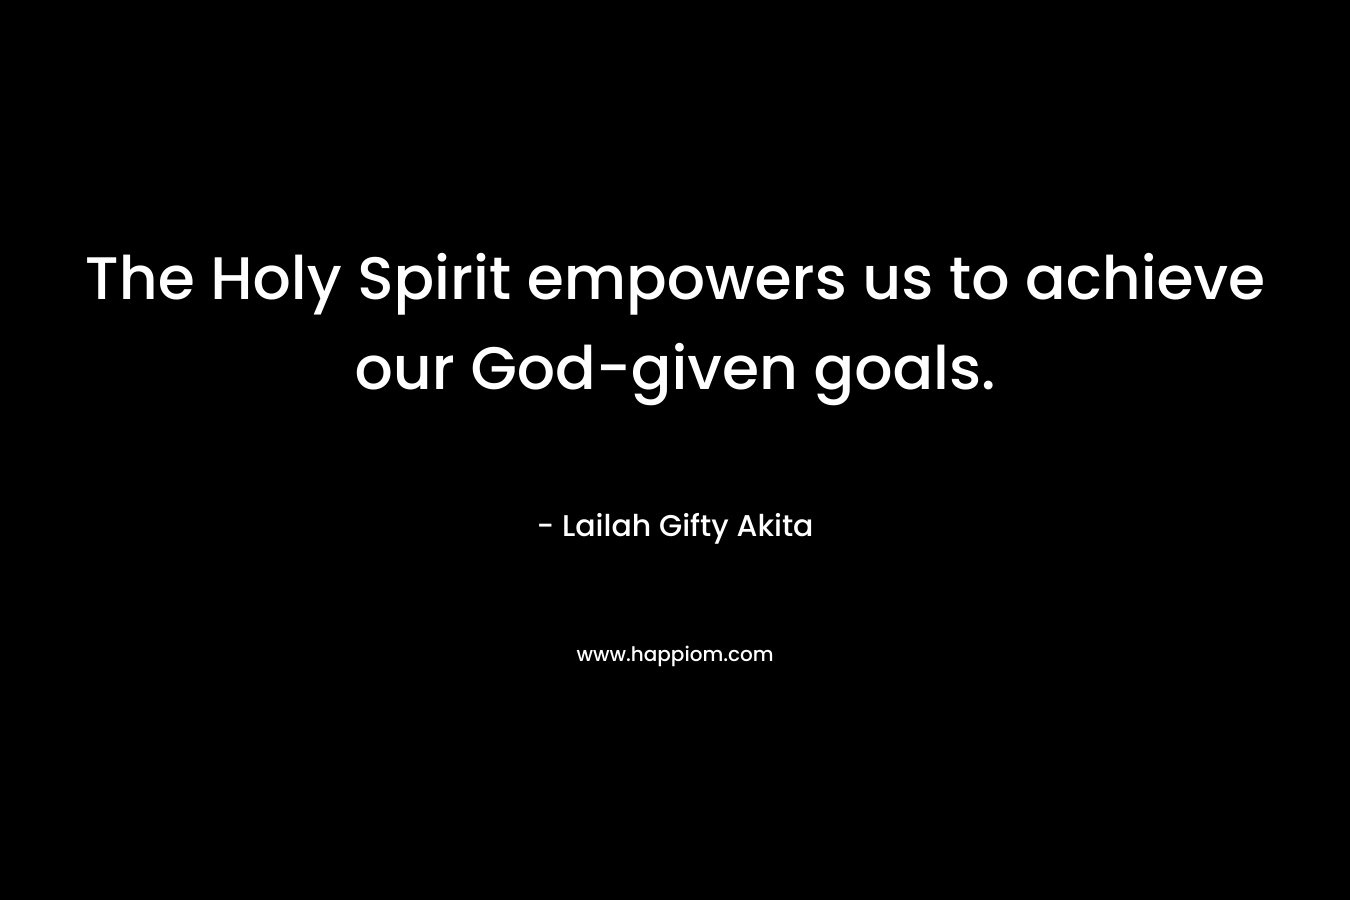 The Holy Spirit empowers us to achieve our God-given goals.